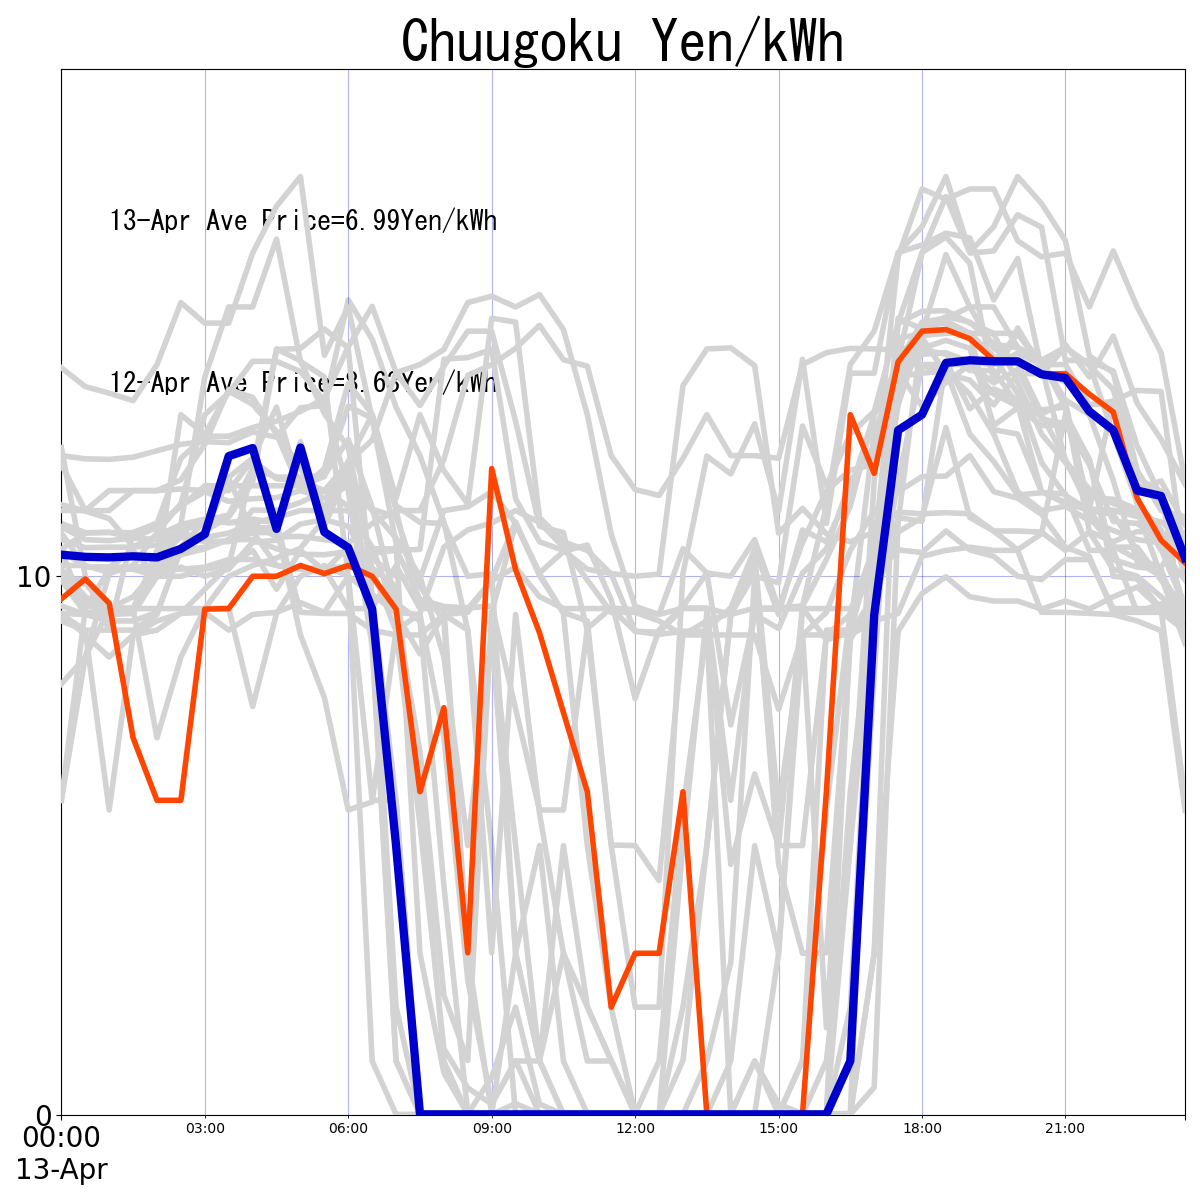 Japanese Electricity JEPX Chuugoku Area Price plotted by time period over the last 30 days.